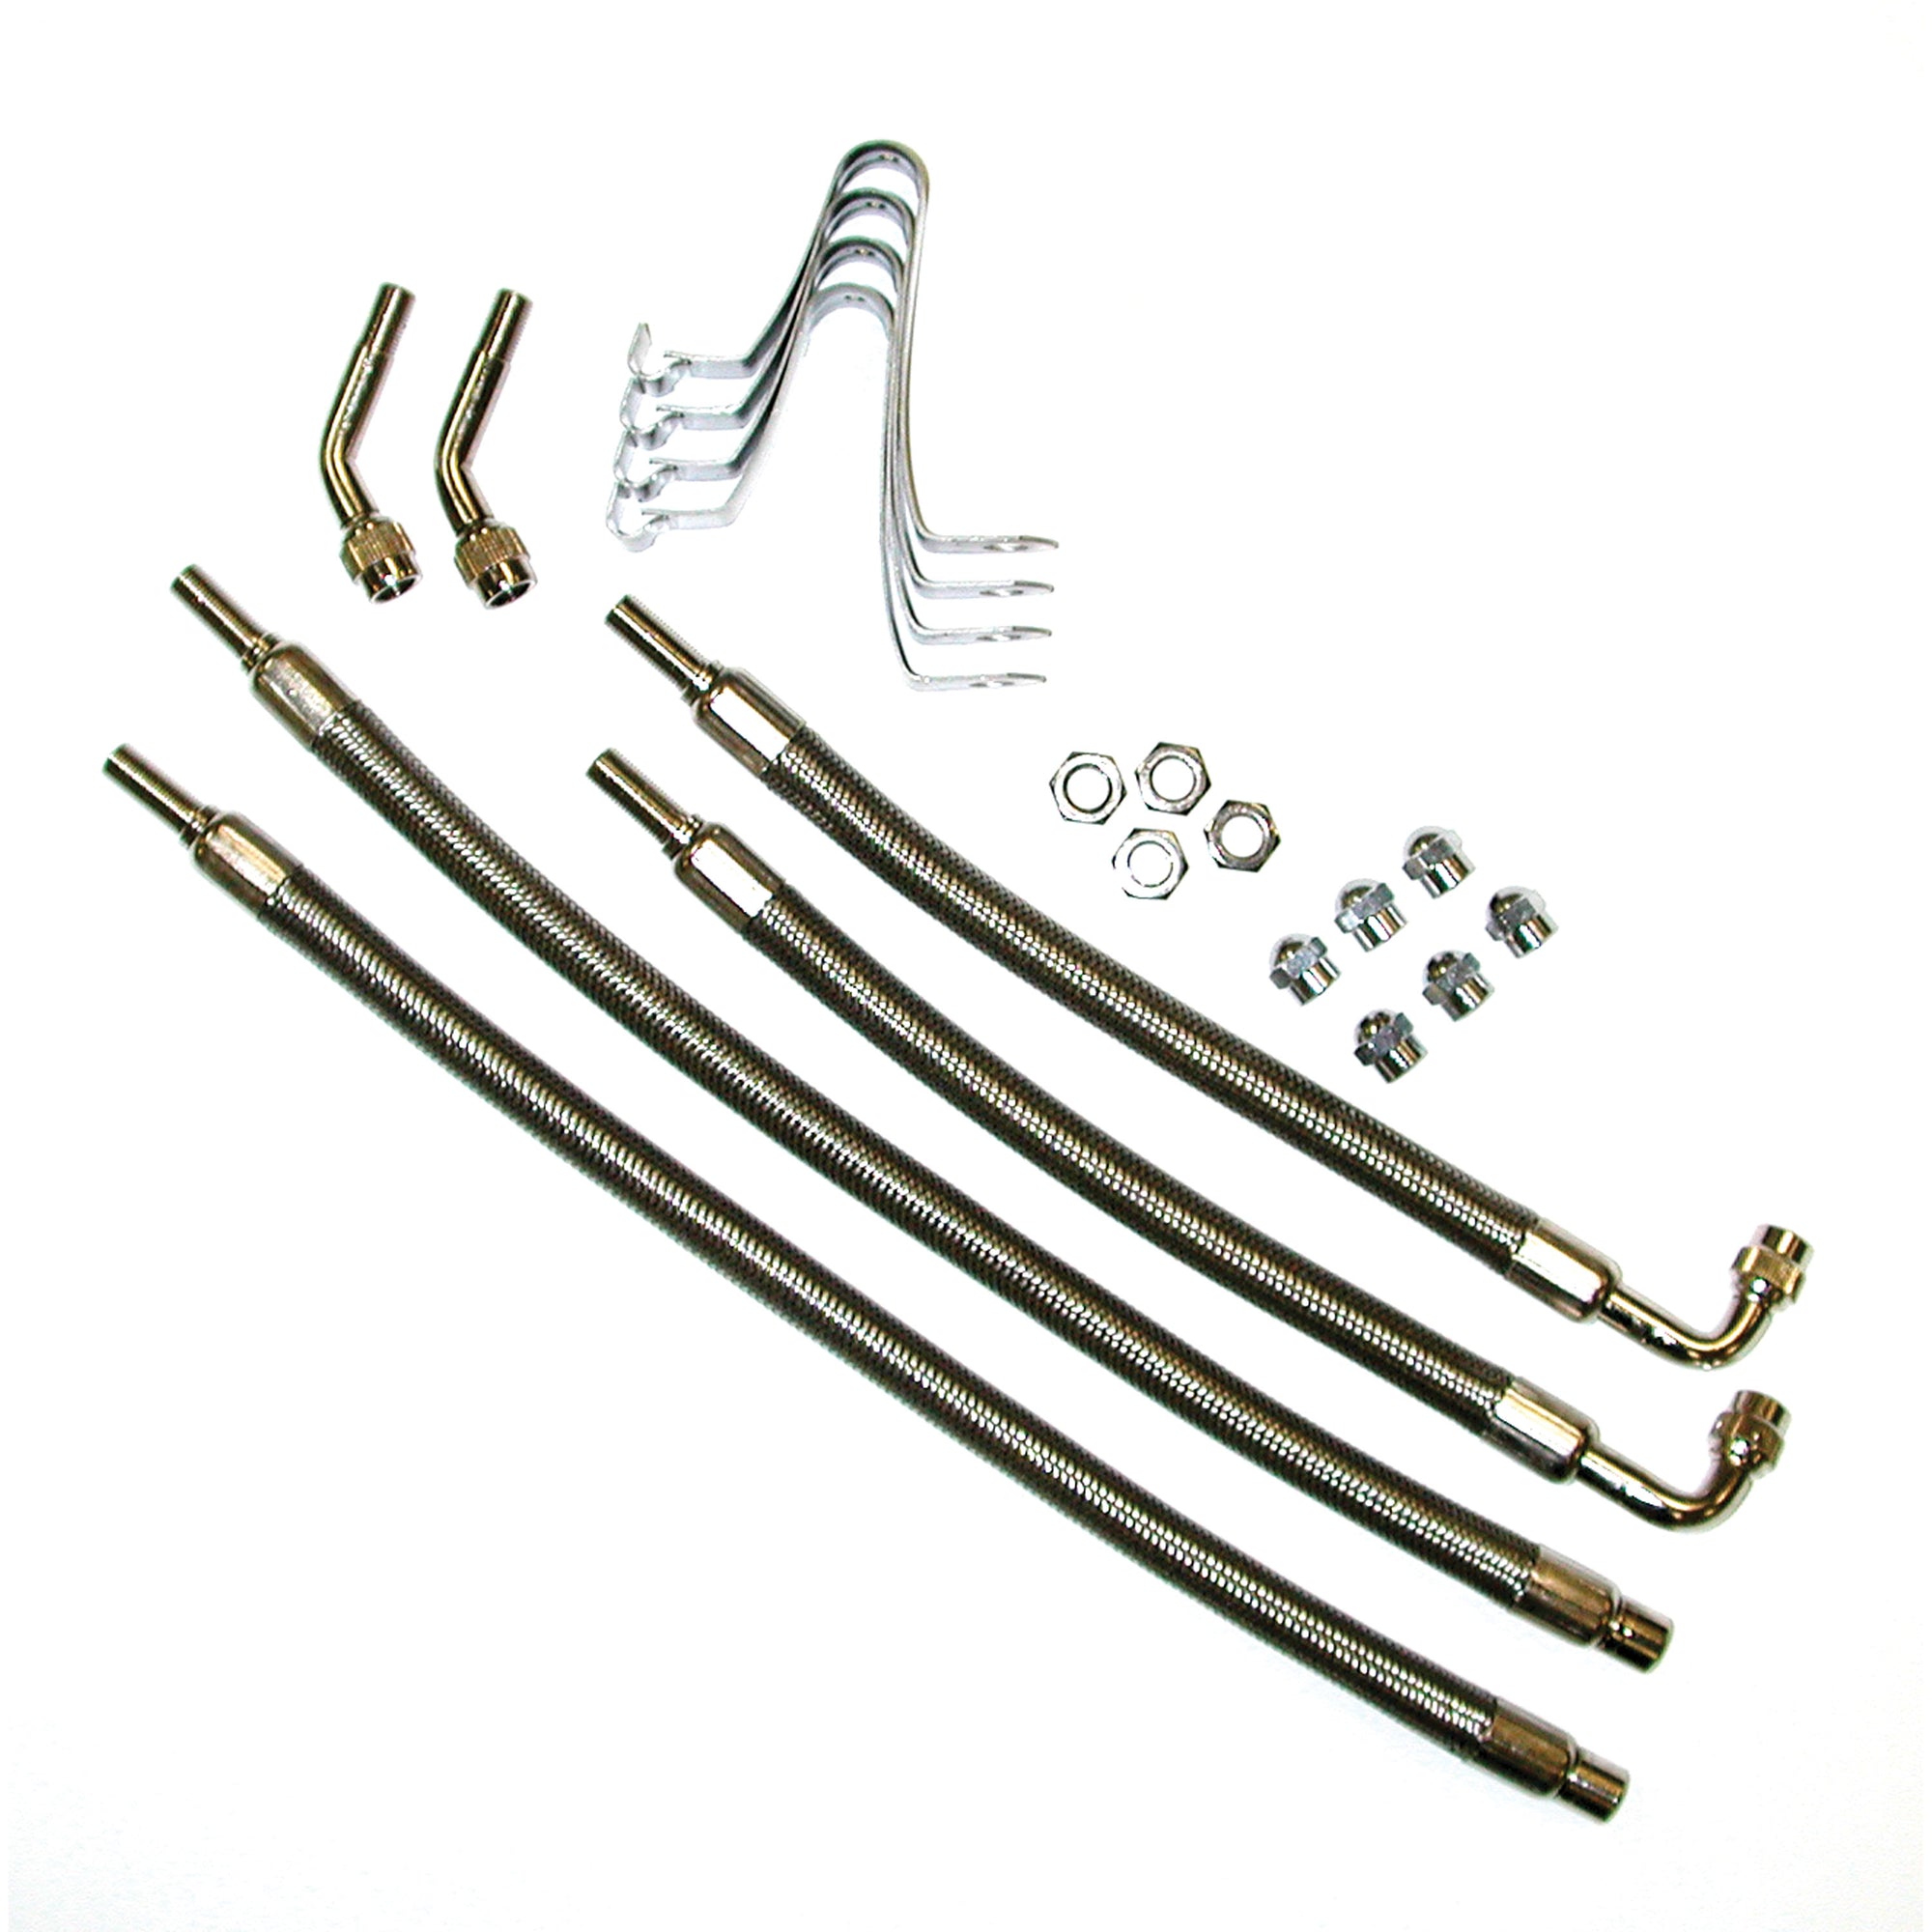 Wheel Masters 8208 Hose Extenders For 16"-19.5" Wheel Liners & Covers - 4 Hose Kit, Hub Hole Mount